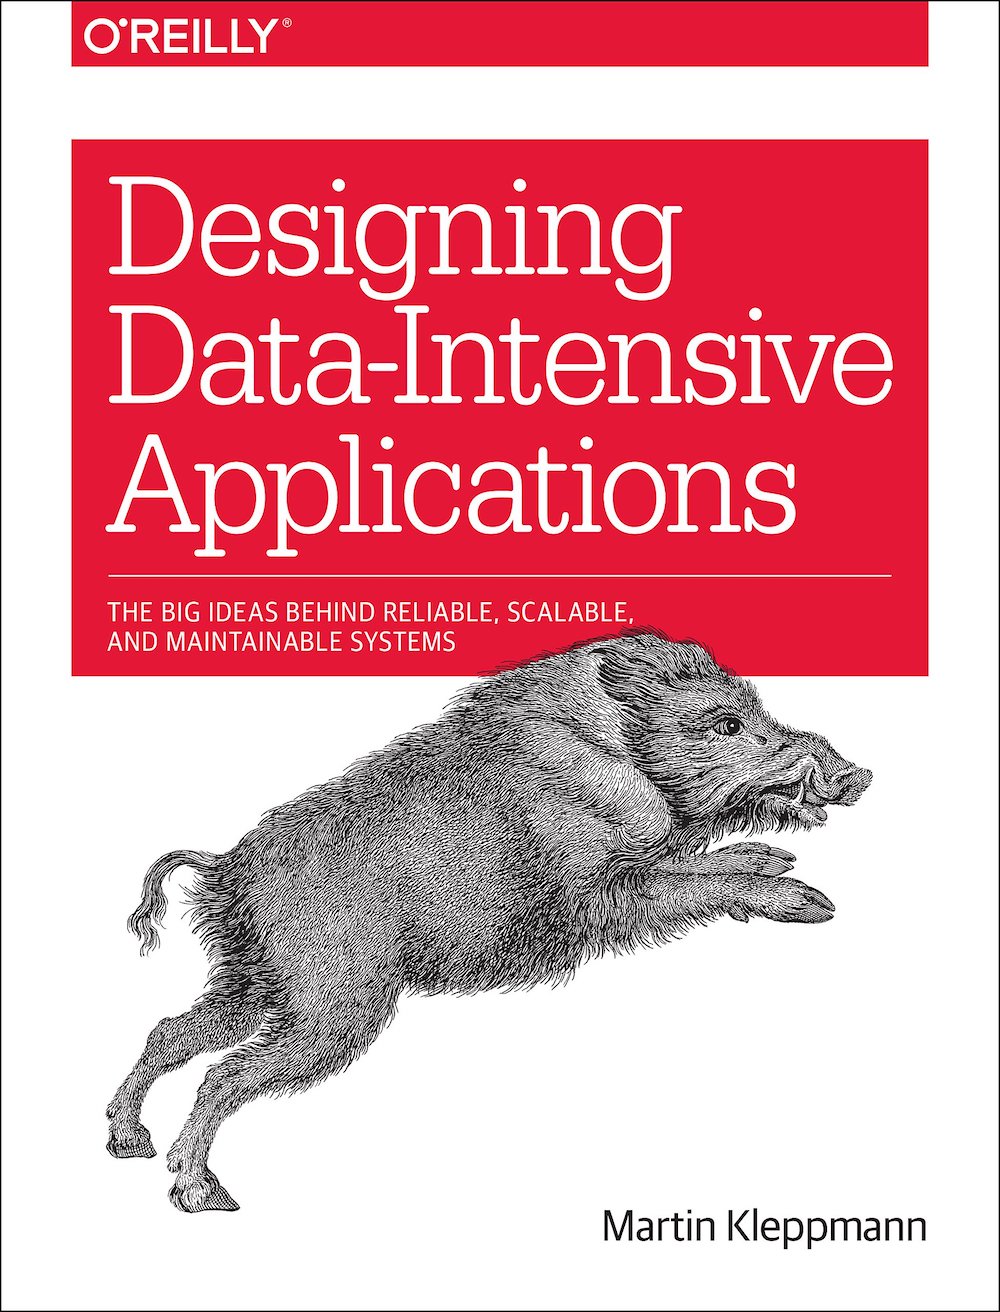 Designing Data-Intensive Applications - Chapter 8 - The Trouble with Distributed Systems